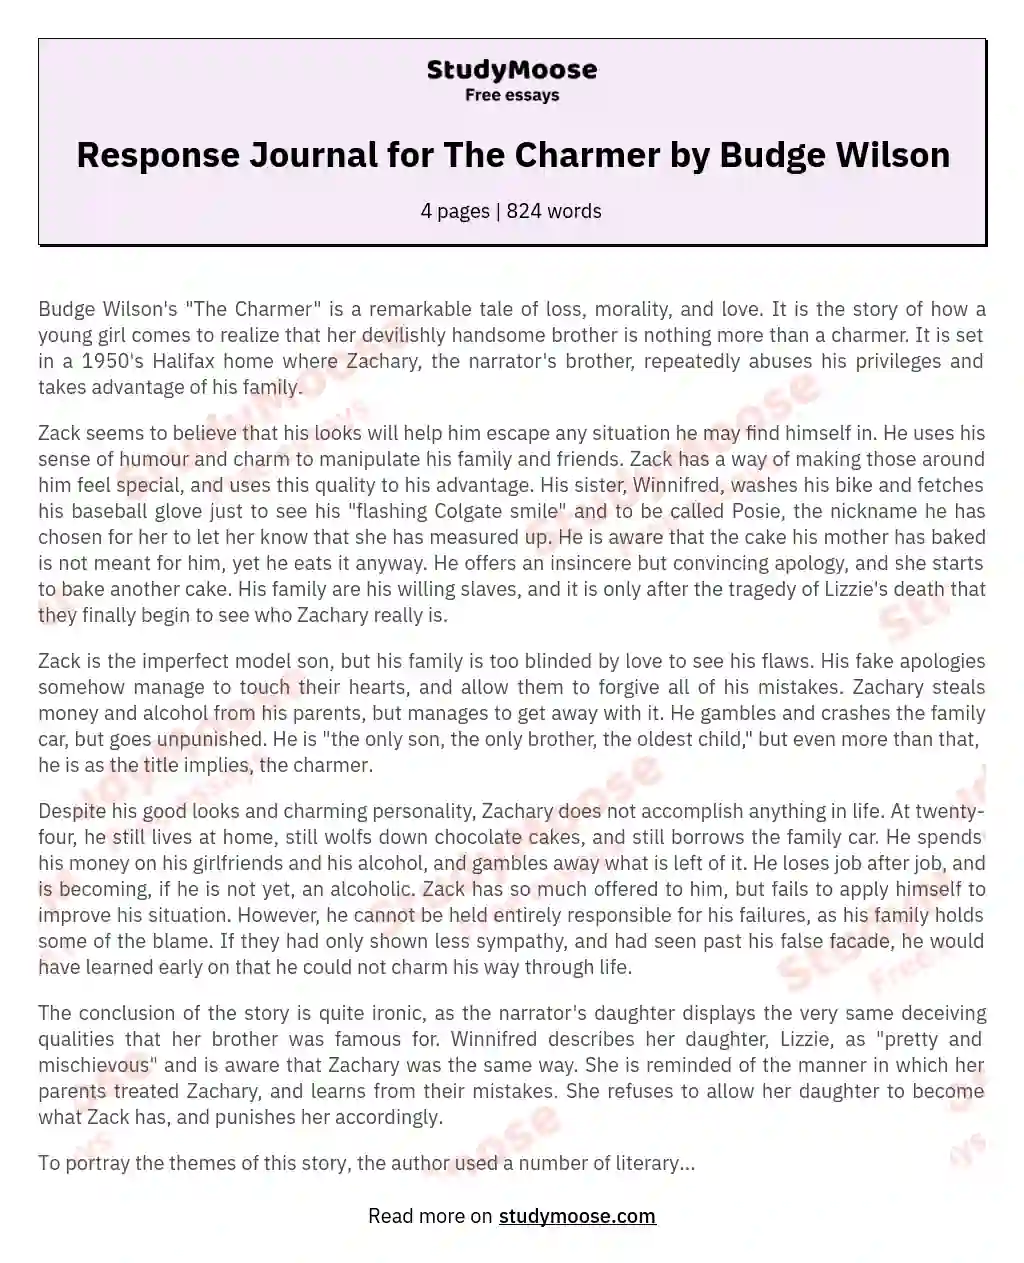 Response Journal for The Charmer by Budge Wilson essay